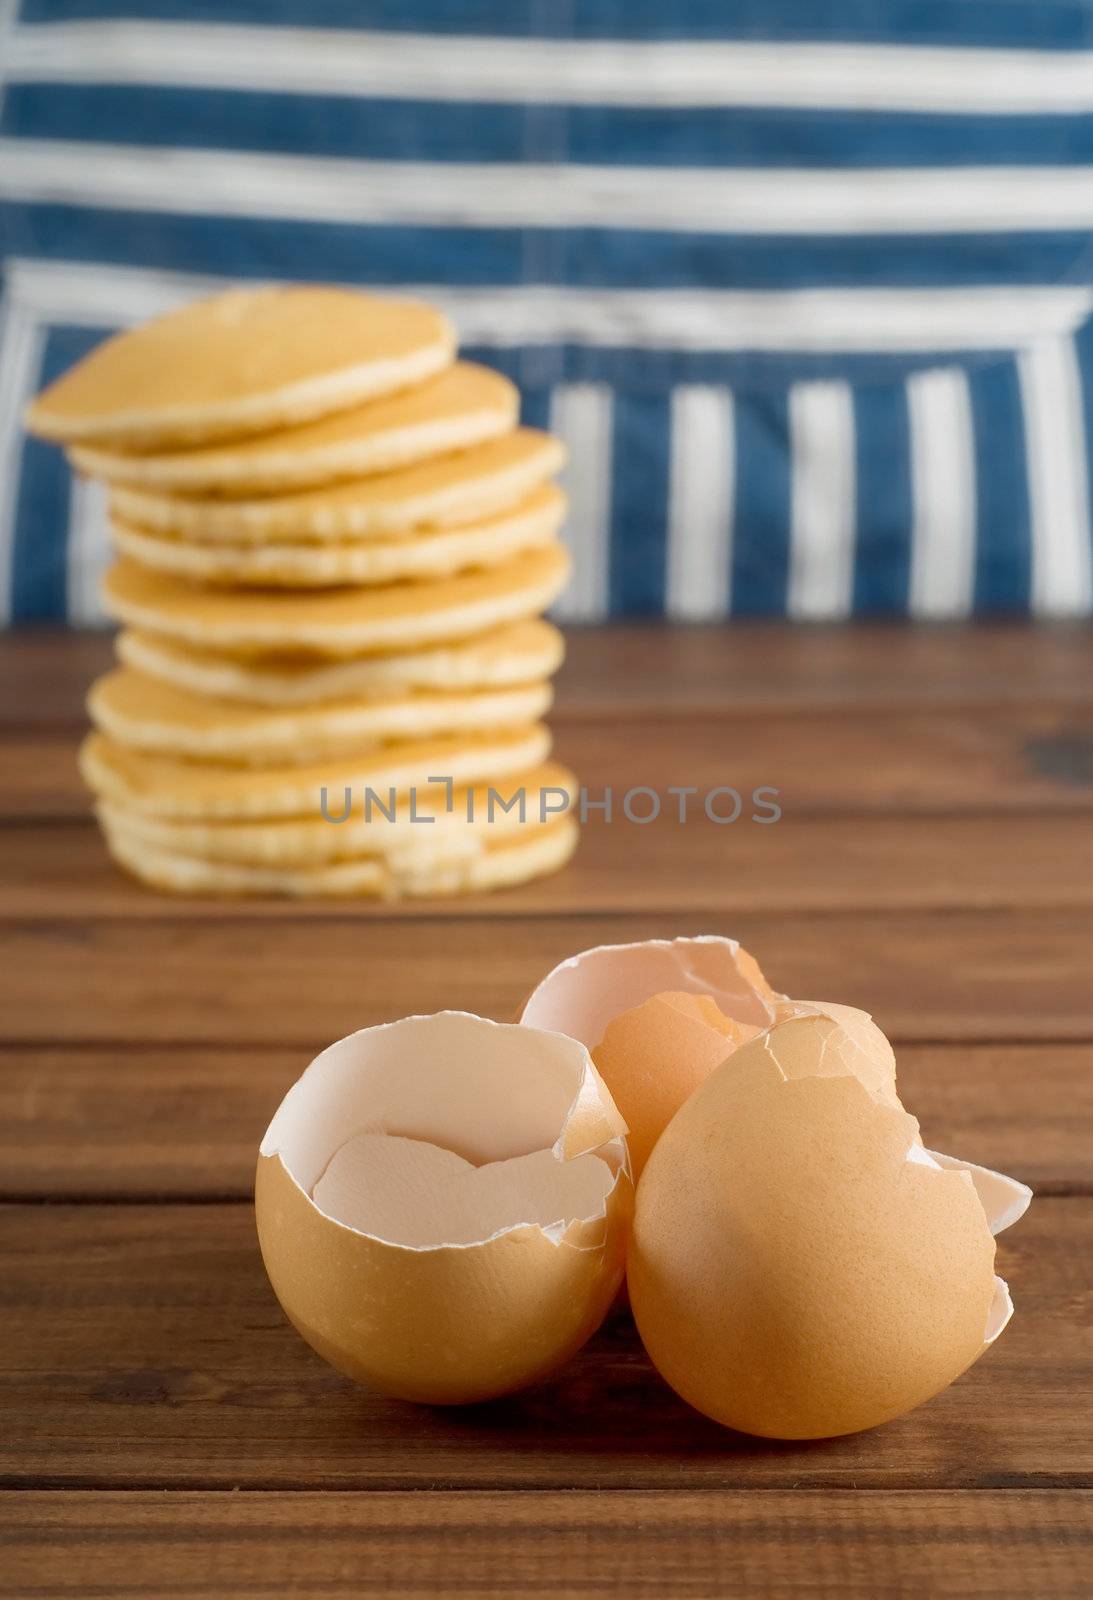 Broken egg shells with flapjacks and chef apron in background